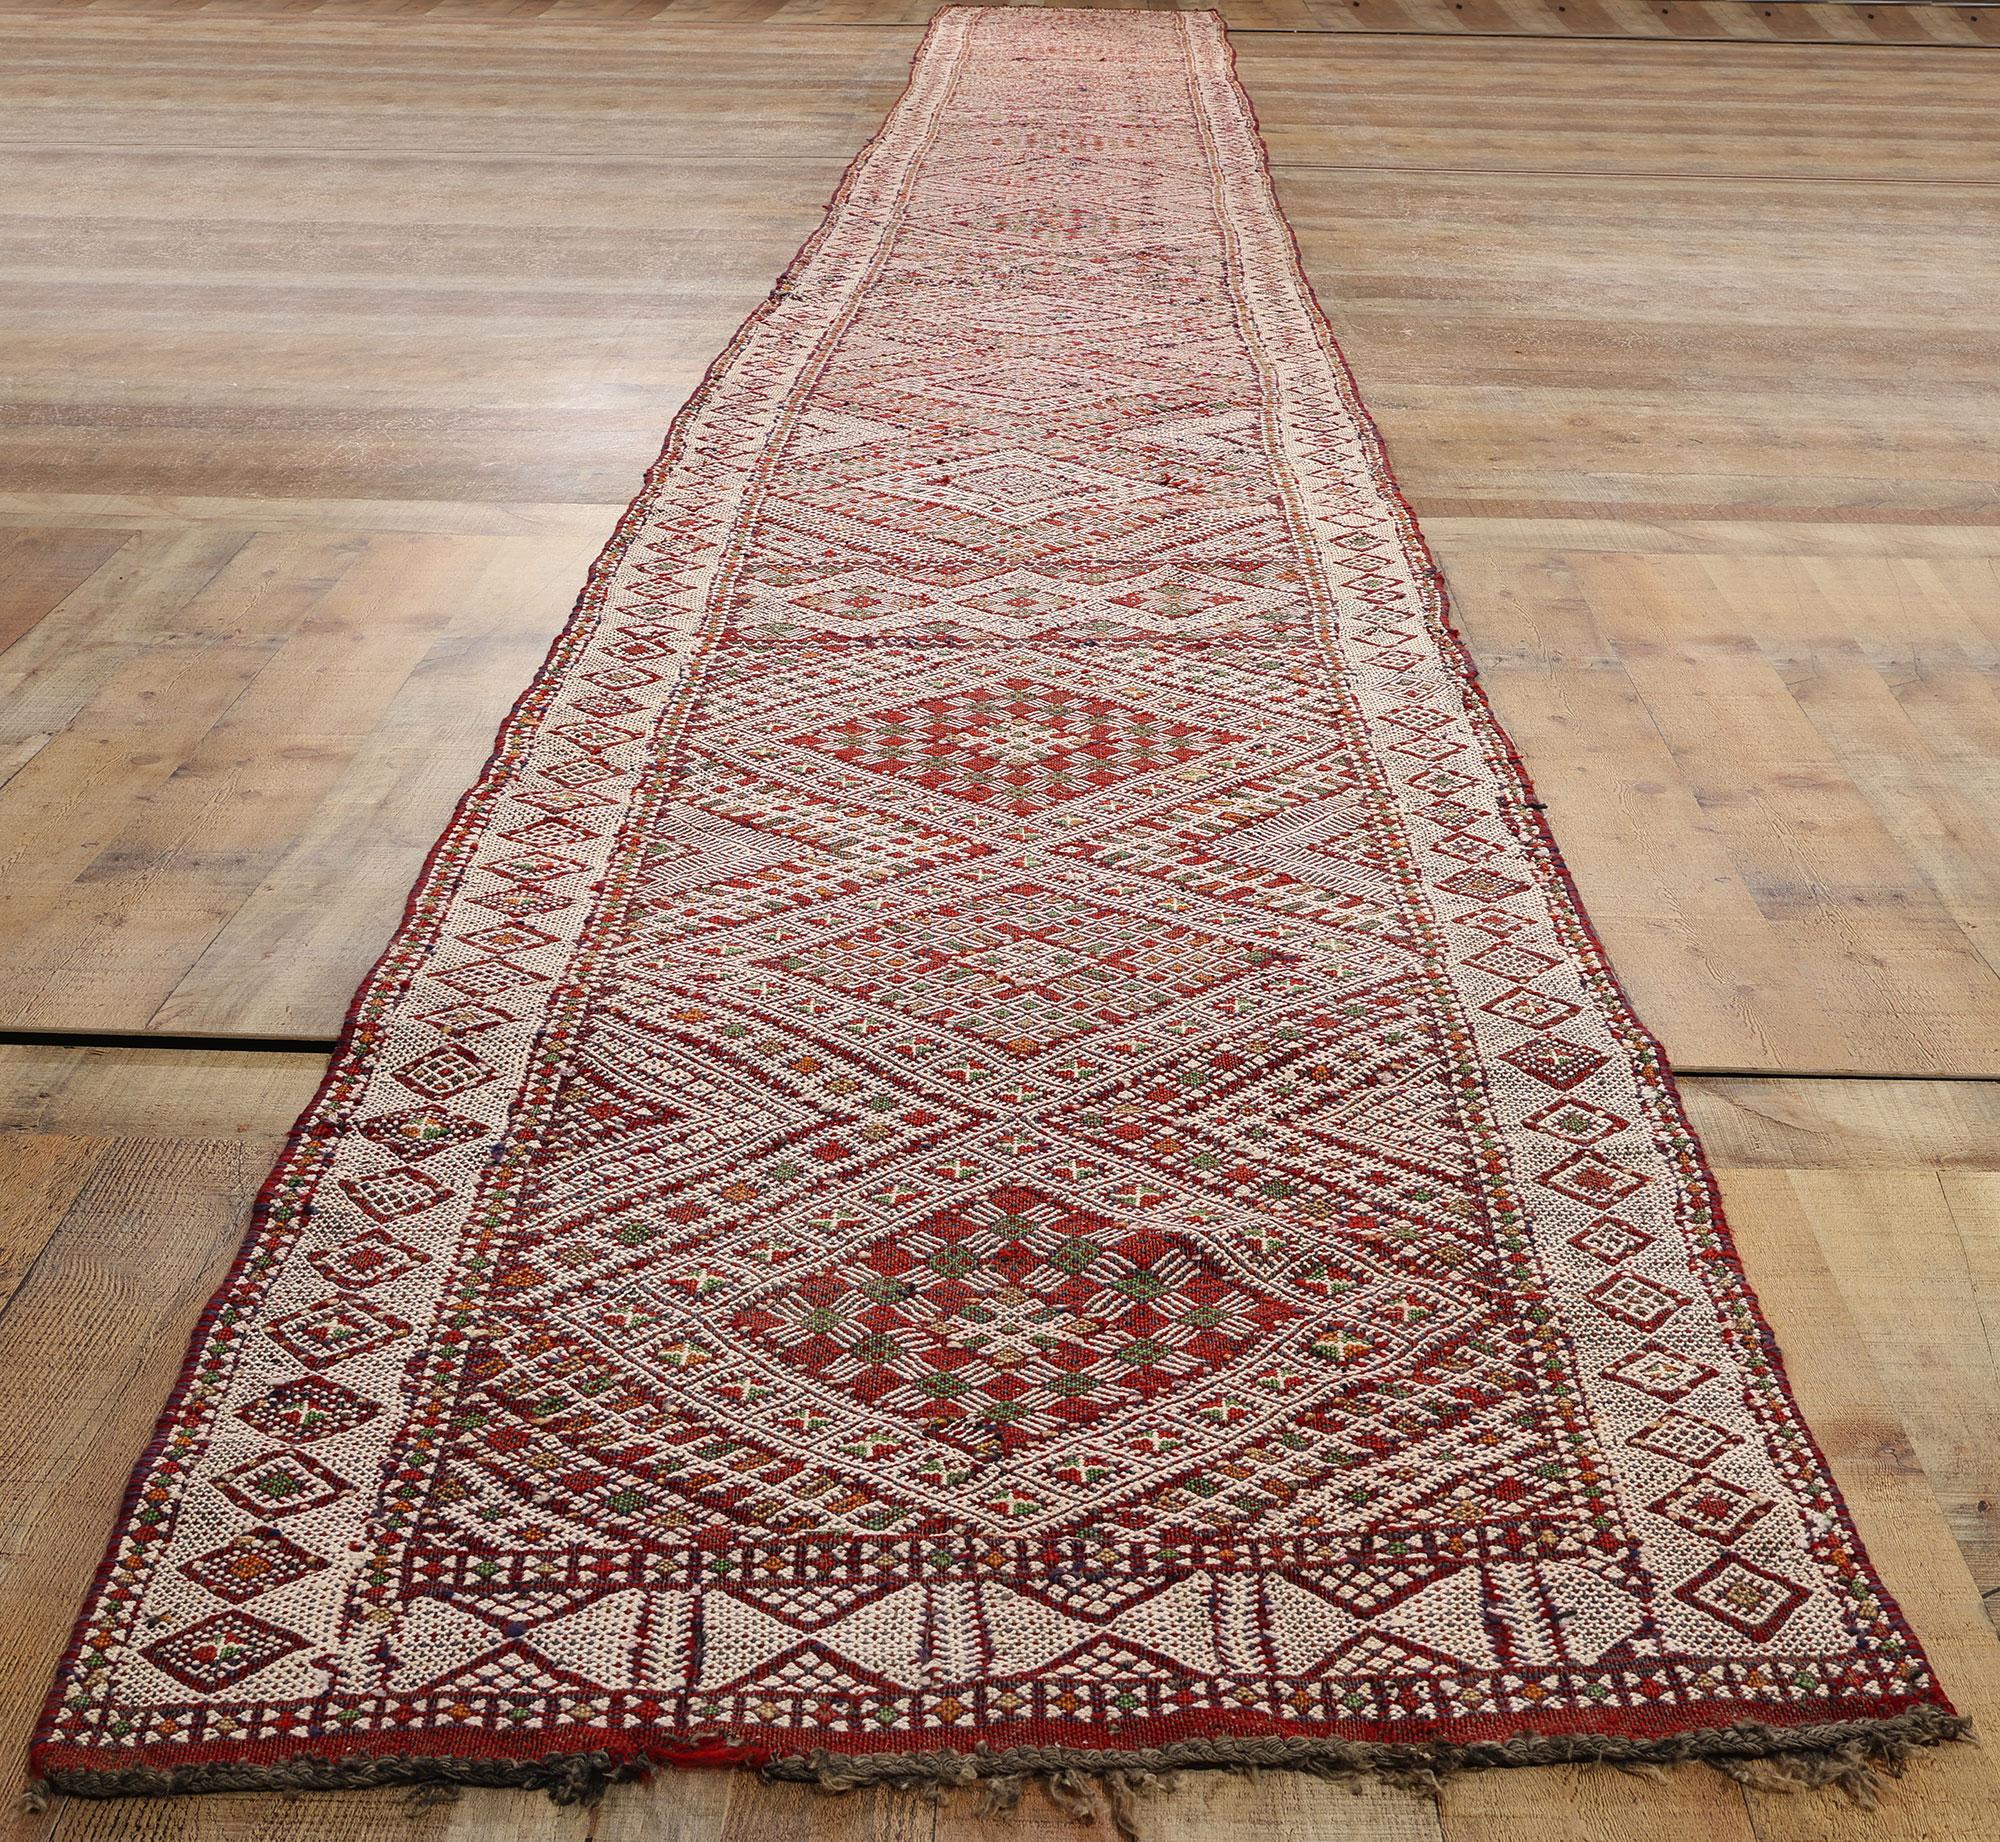 Midcentury Bohemian Vintage Moroccan Zemmour Kilim Berber Rug, 02'09 x 23'10 In Good Condition For Sale In Dallas, TX